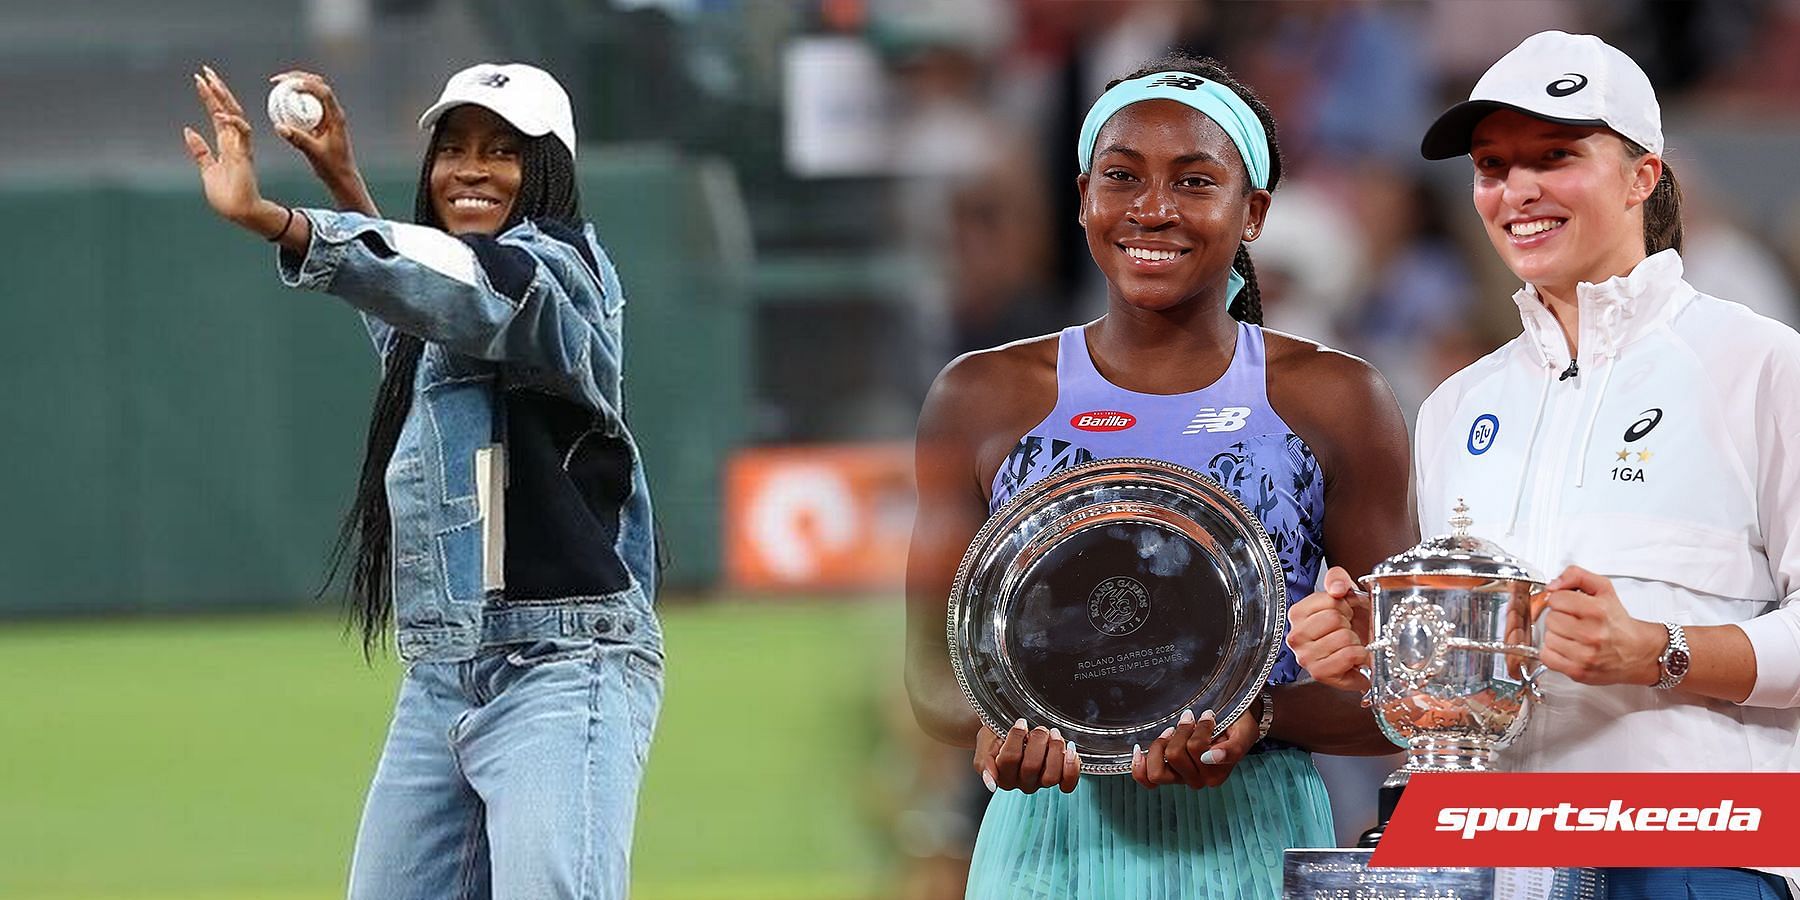 Coco Gauff served the first pitch at the San Francisco Giants&#039; match against the Chicago Cubs on Friday